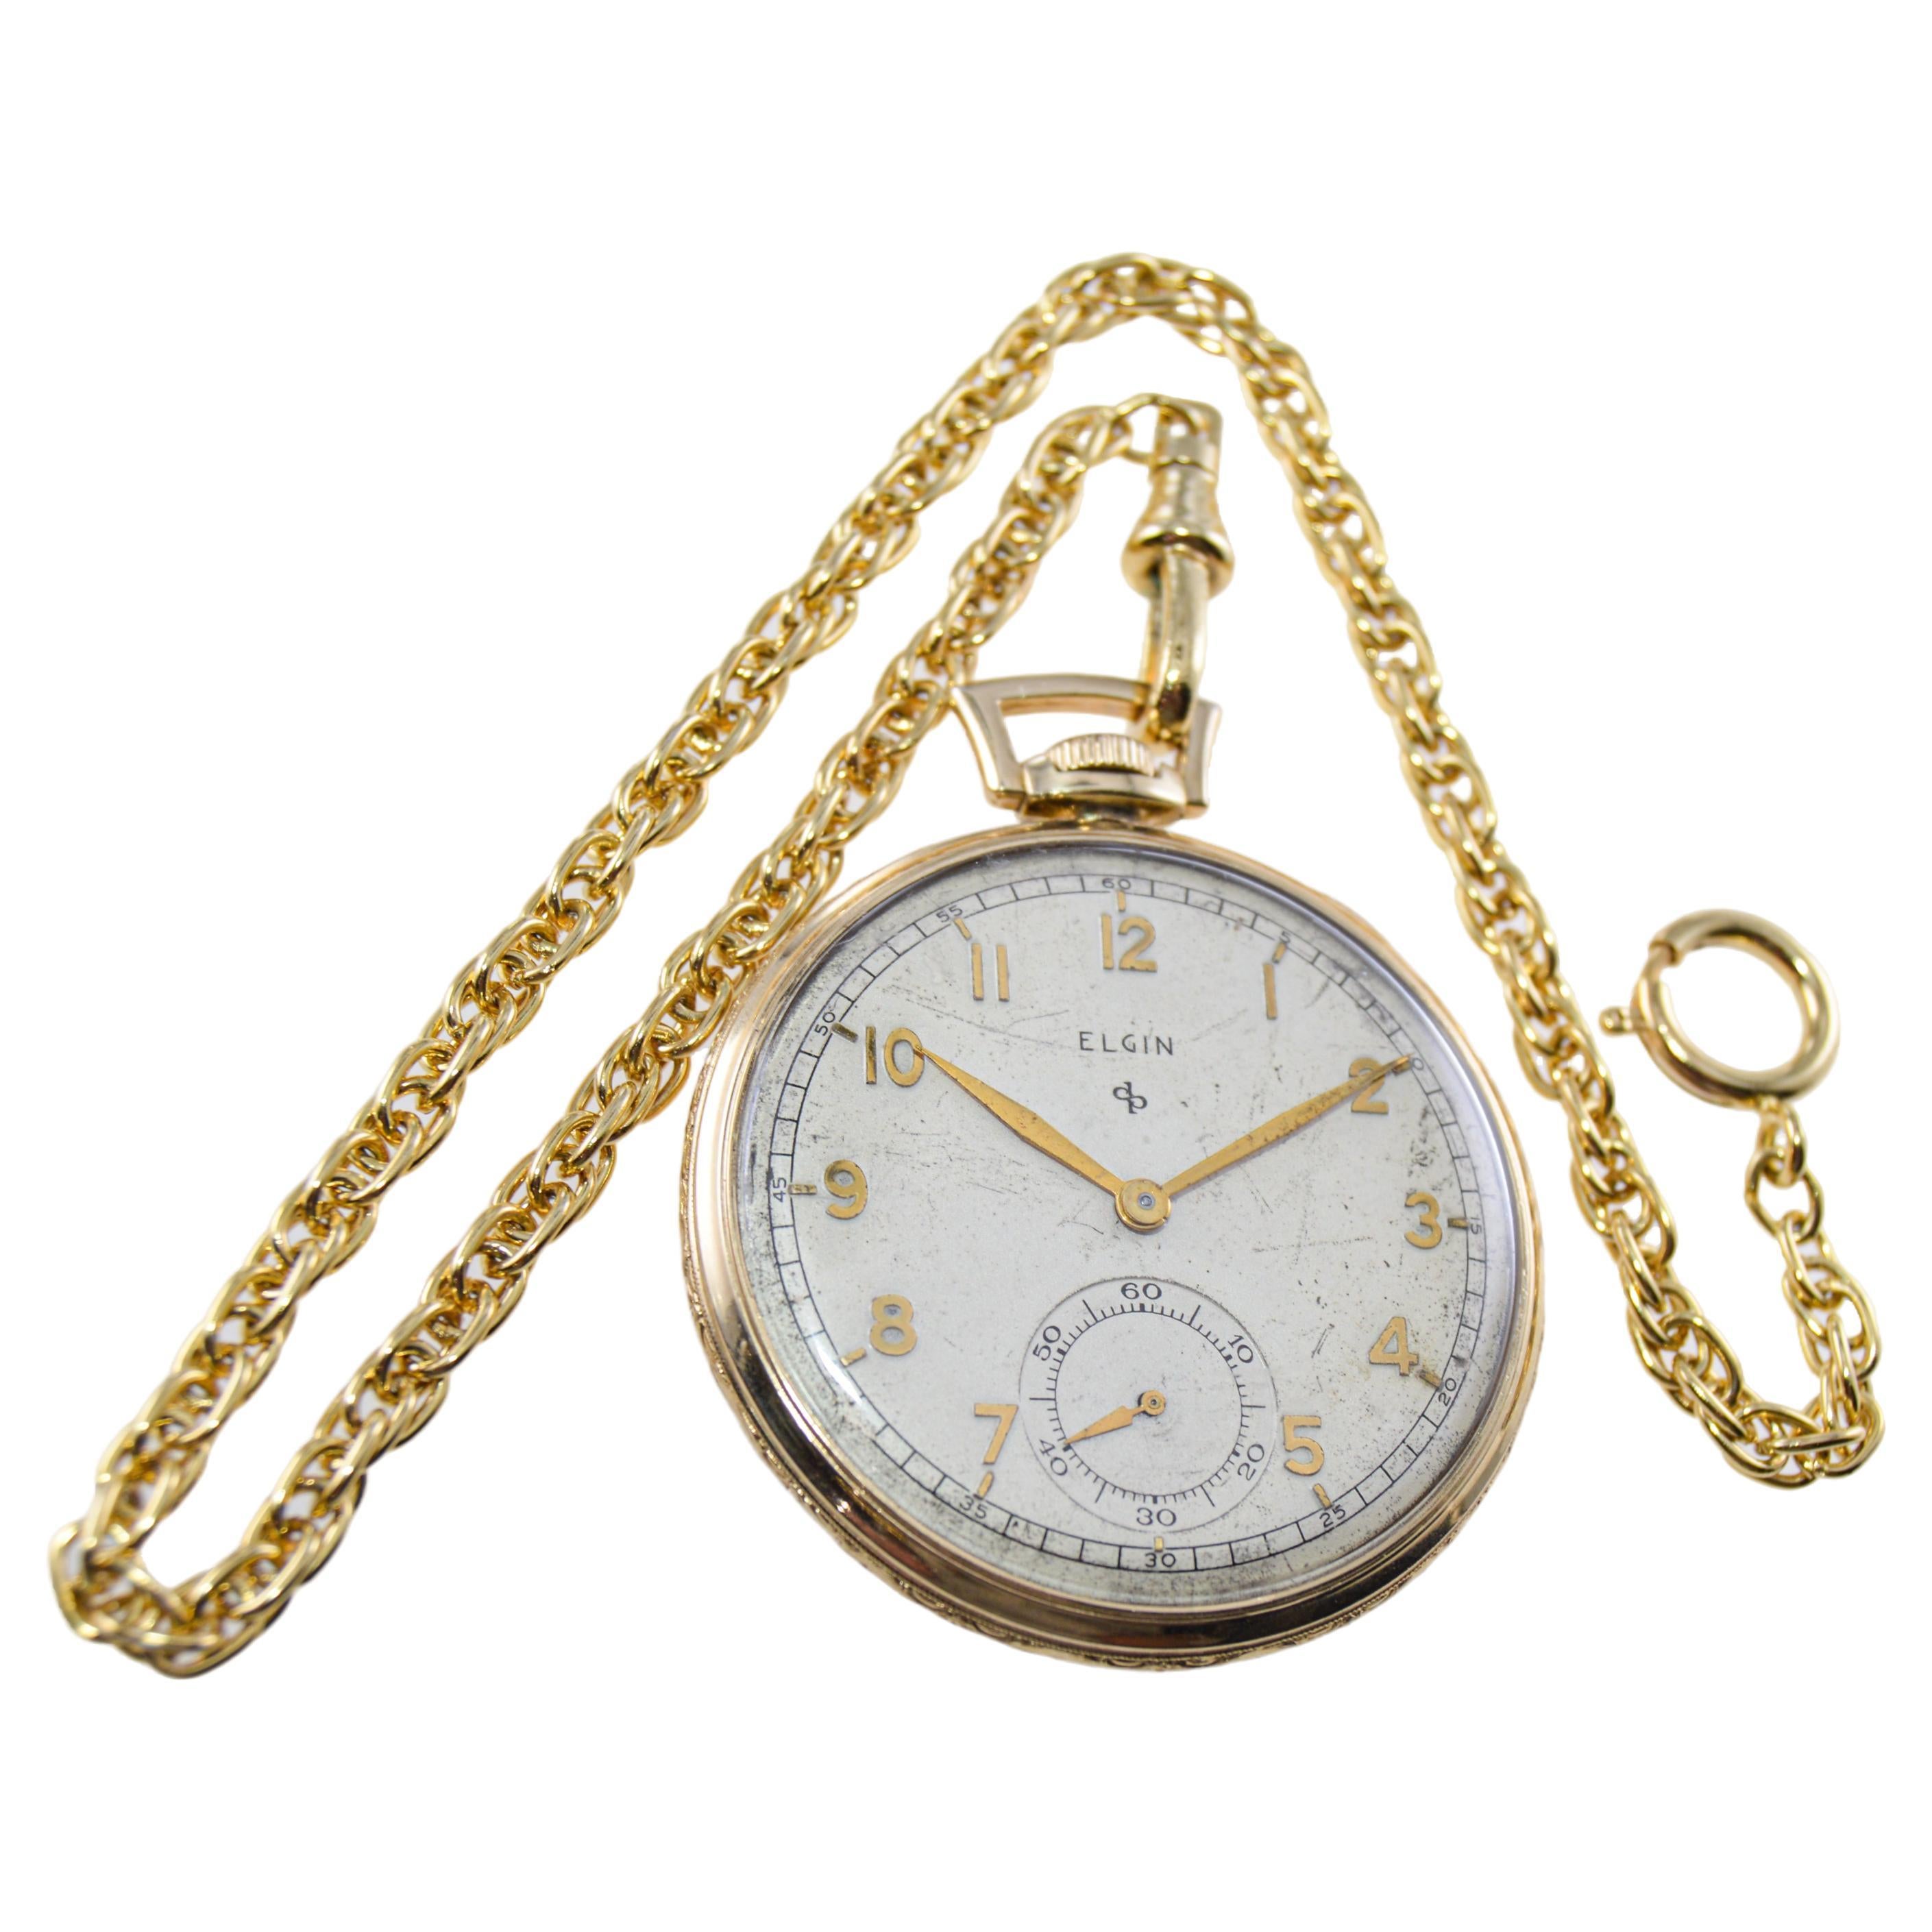 How do I know if my pocket watch is valuable?